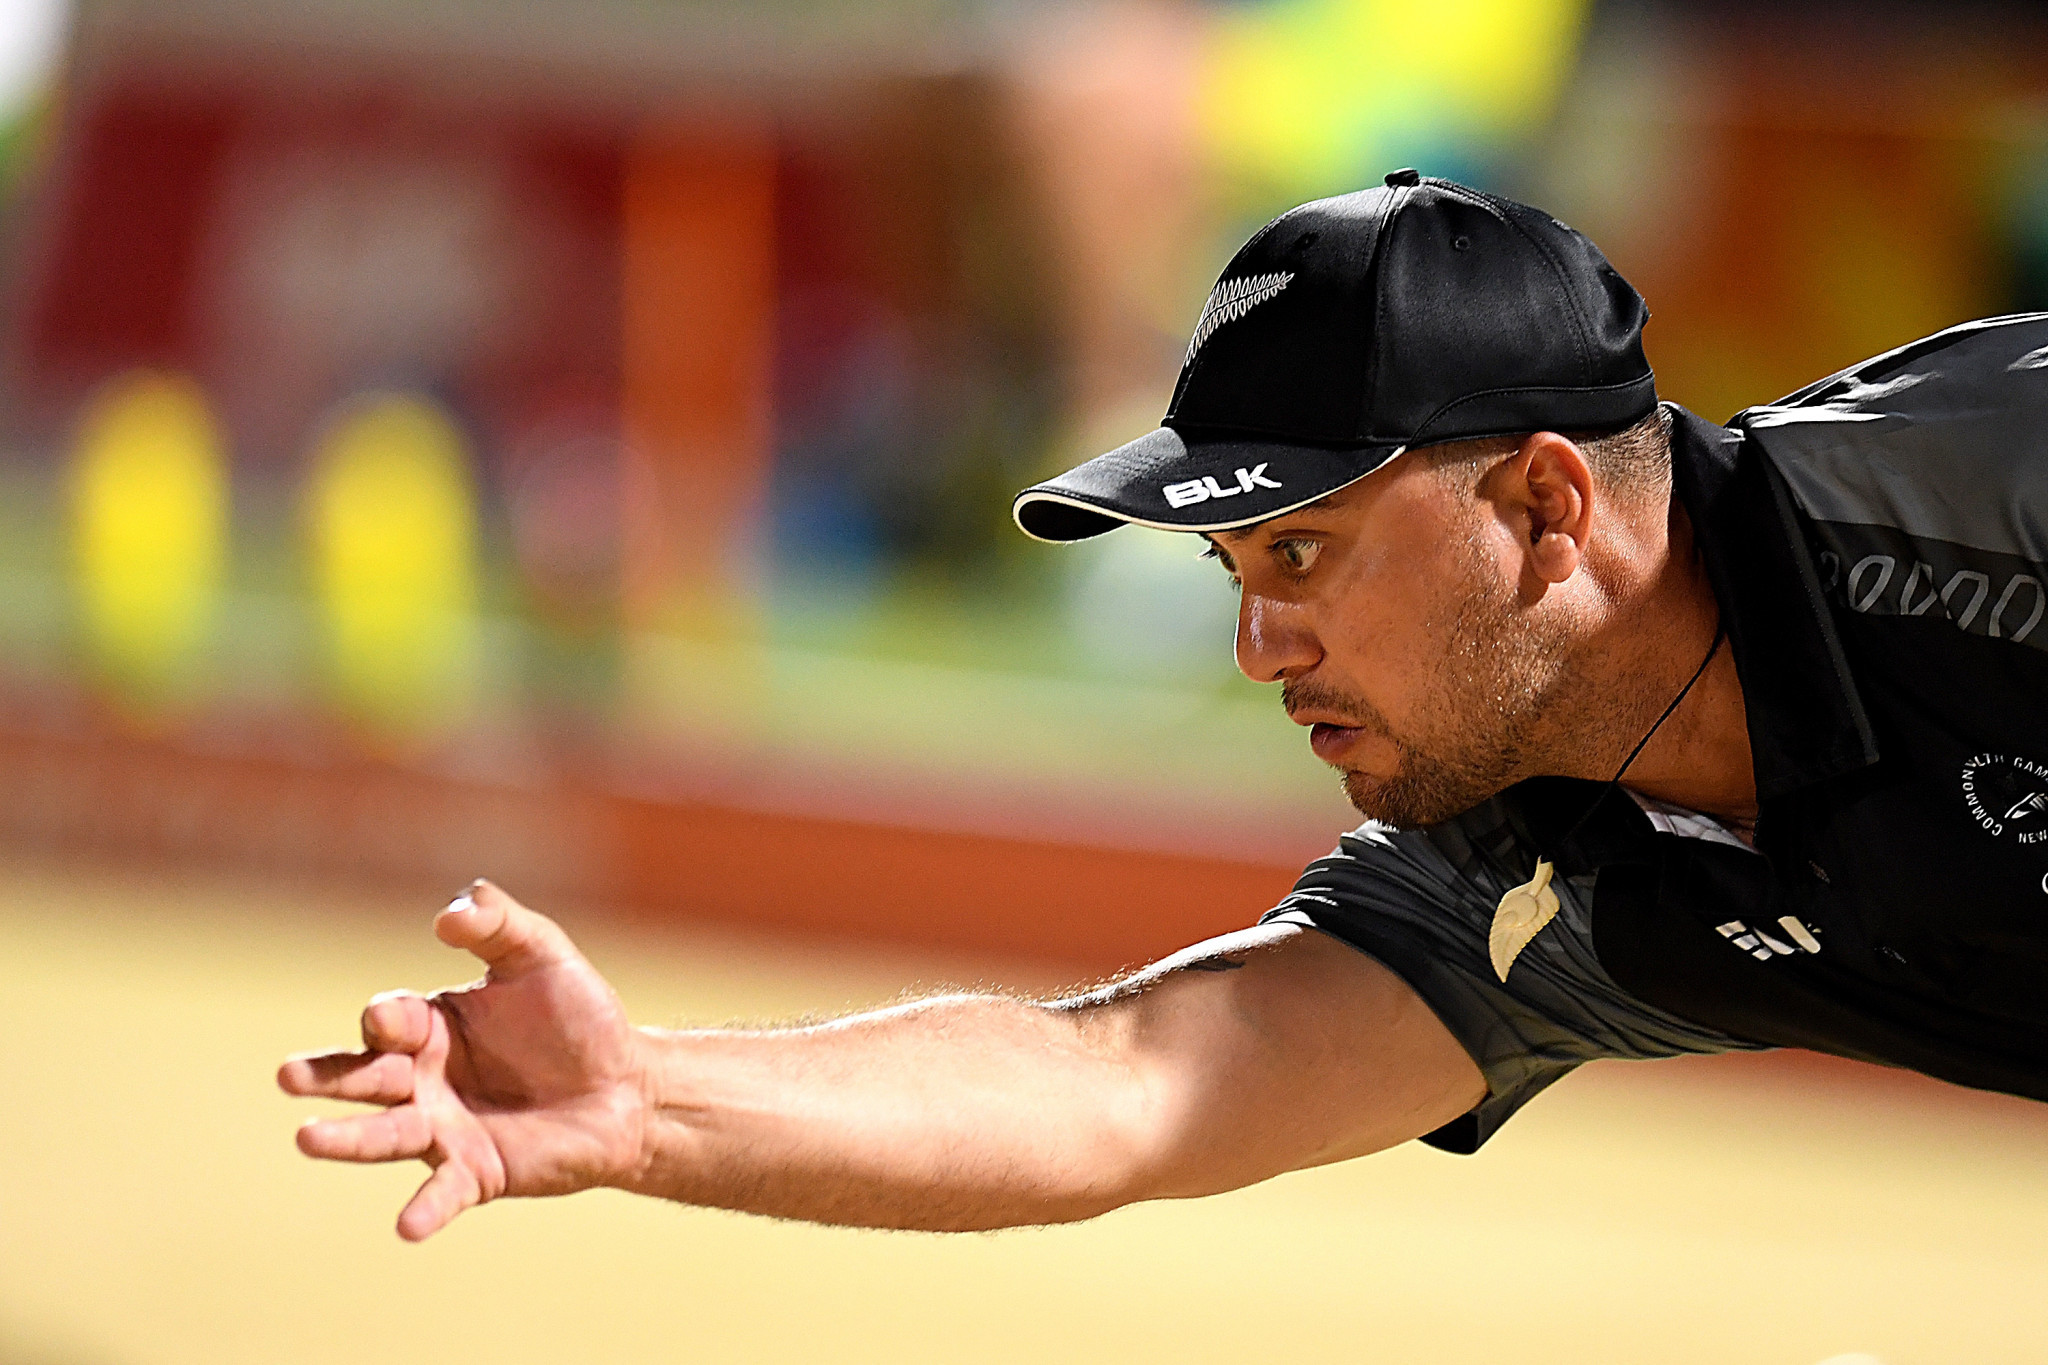 Shannon Mcllroy of New Zealand won section one of the men's event at the World Bowls Singles Champion of Champions to qualify for the semi-finals in New South Wales ©Getty Images